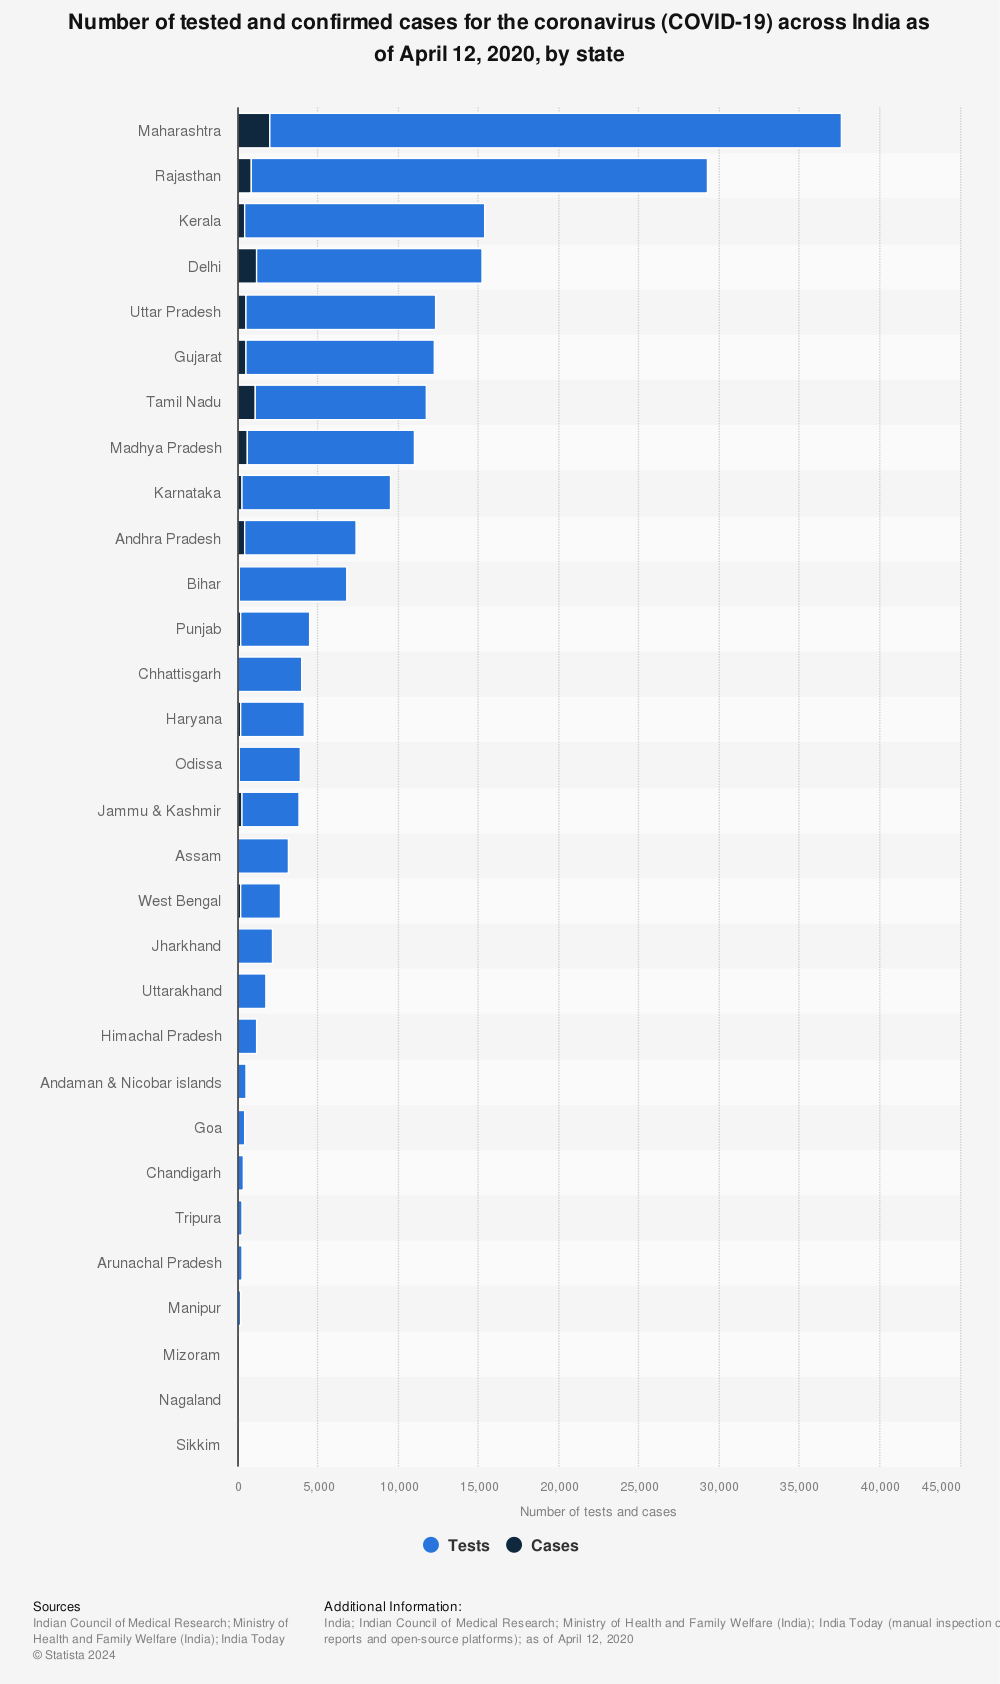 Statistic: Number of tested and confirmed cases for the coronavirus (COVID-19) across India as of April 12, 2020, by state | Statista